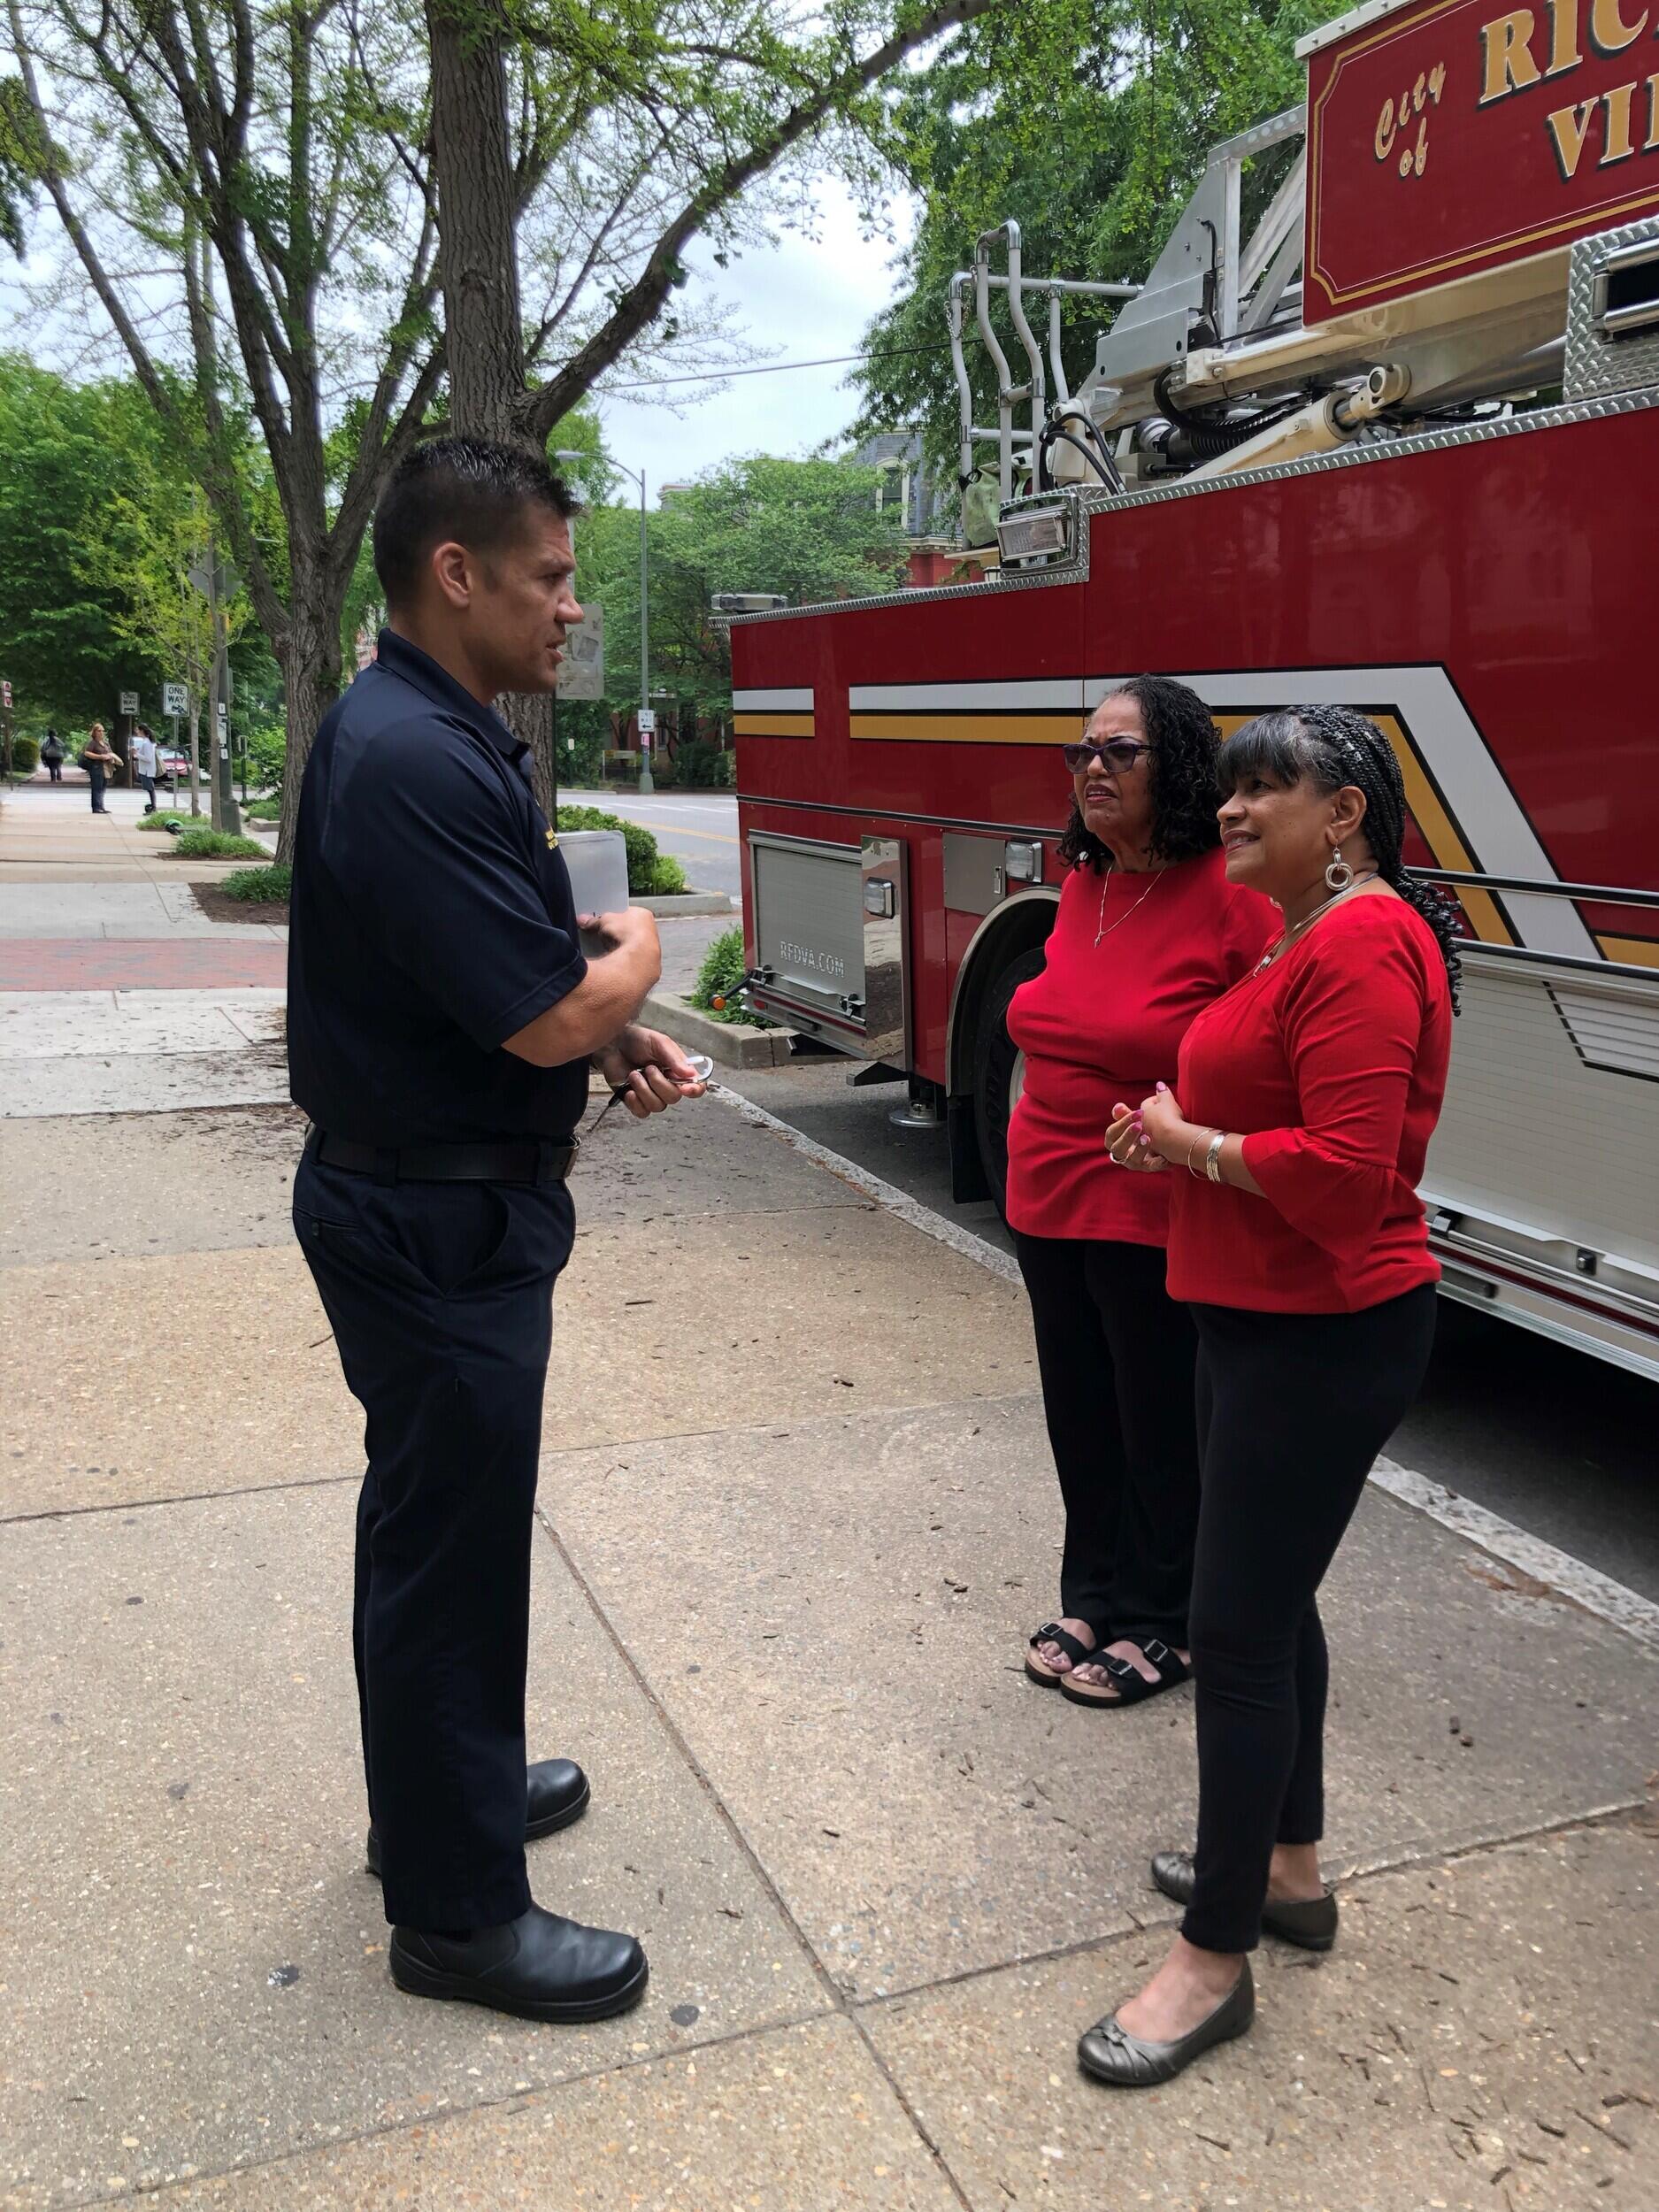 A man standing in front of two women next to a fire truck 